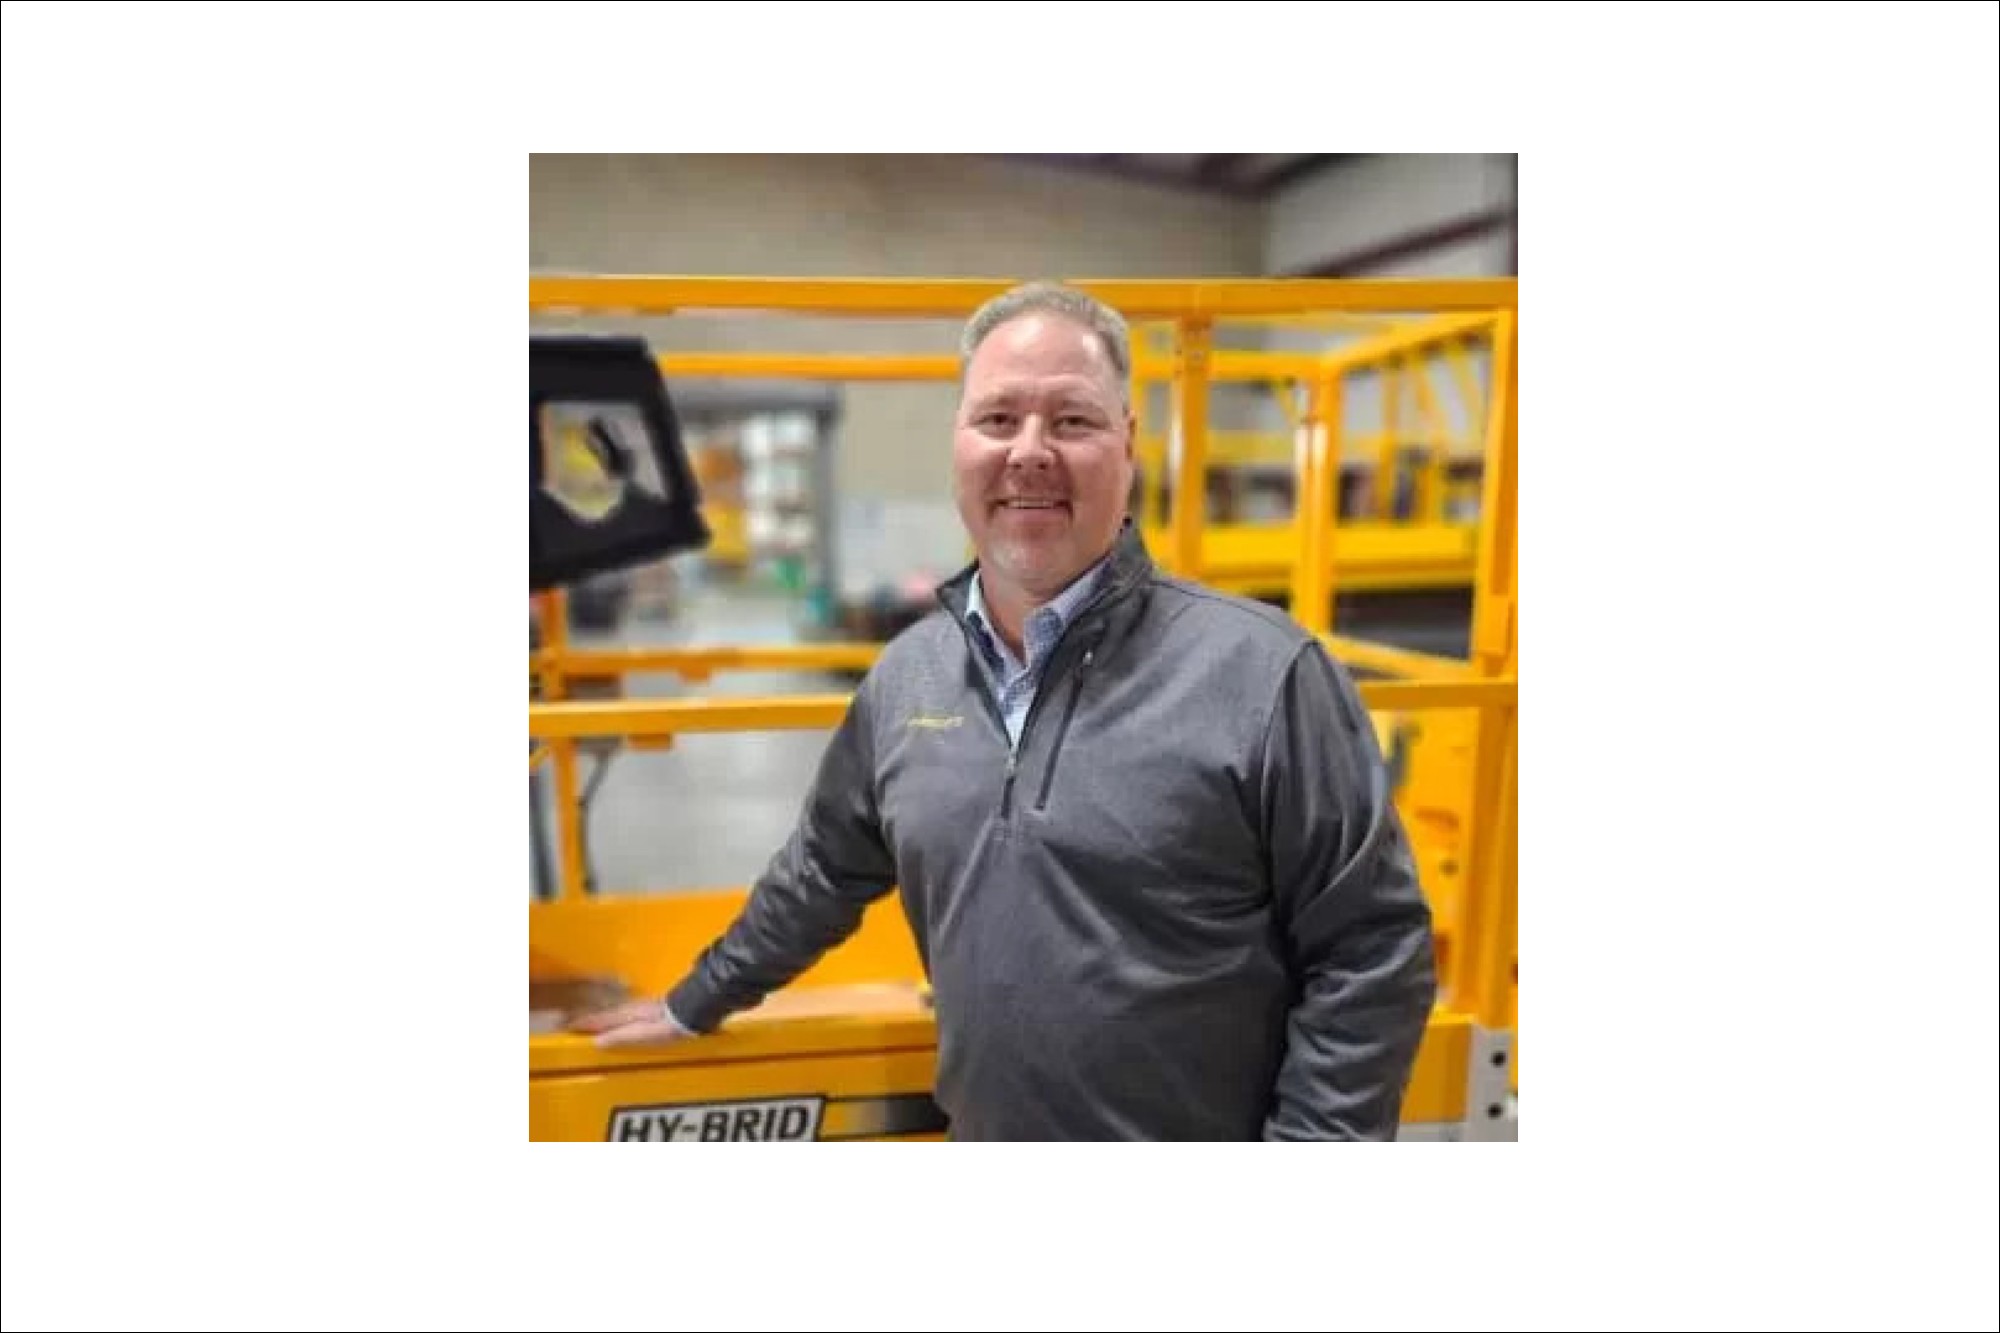 Eric Liner, the new President & CEO of Hy-Brid Lifts